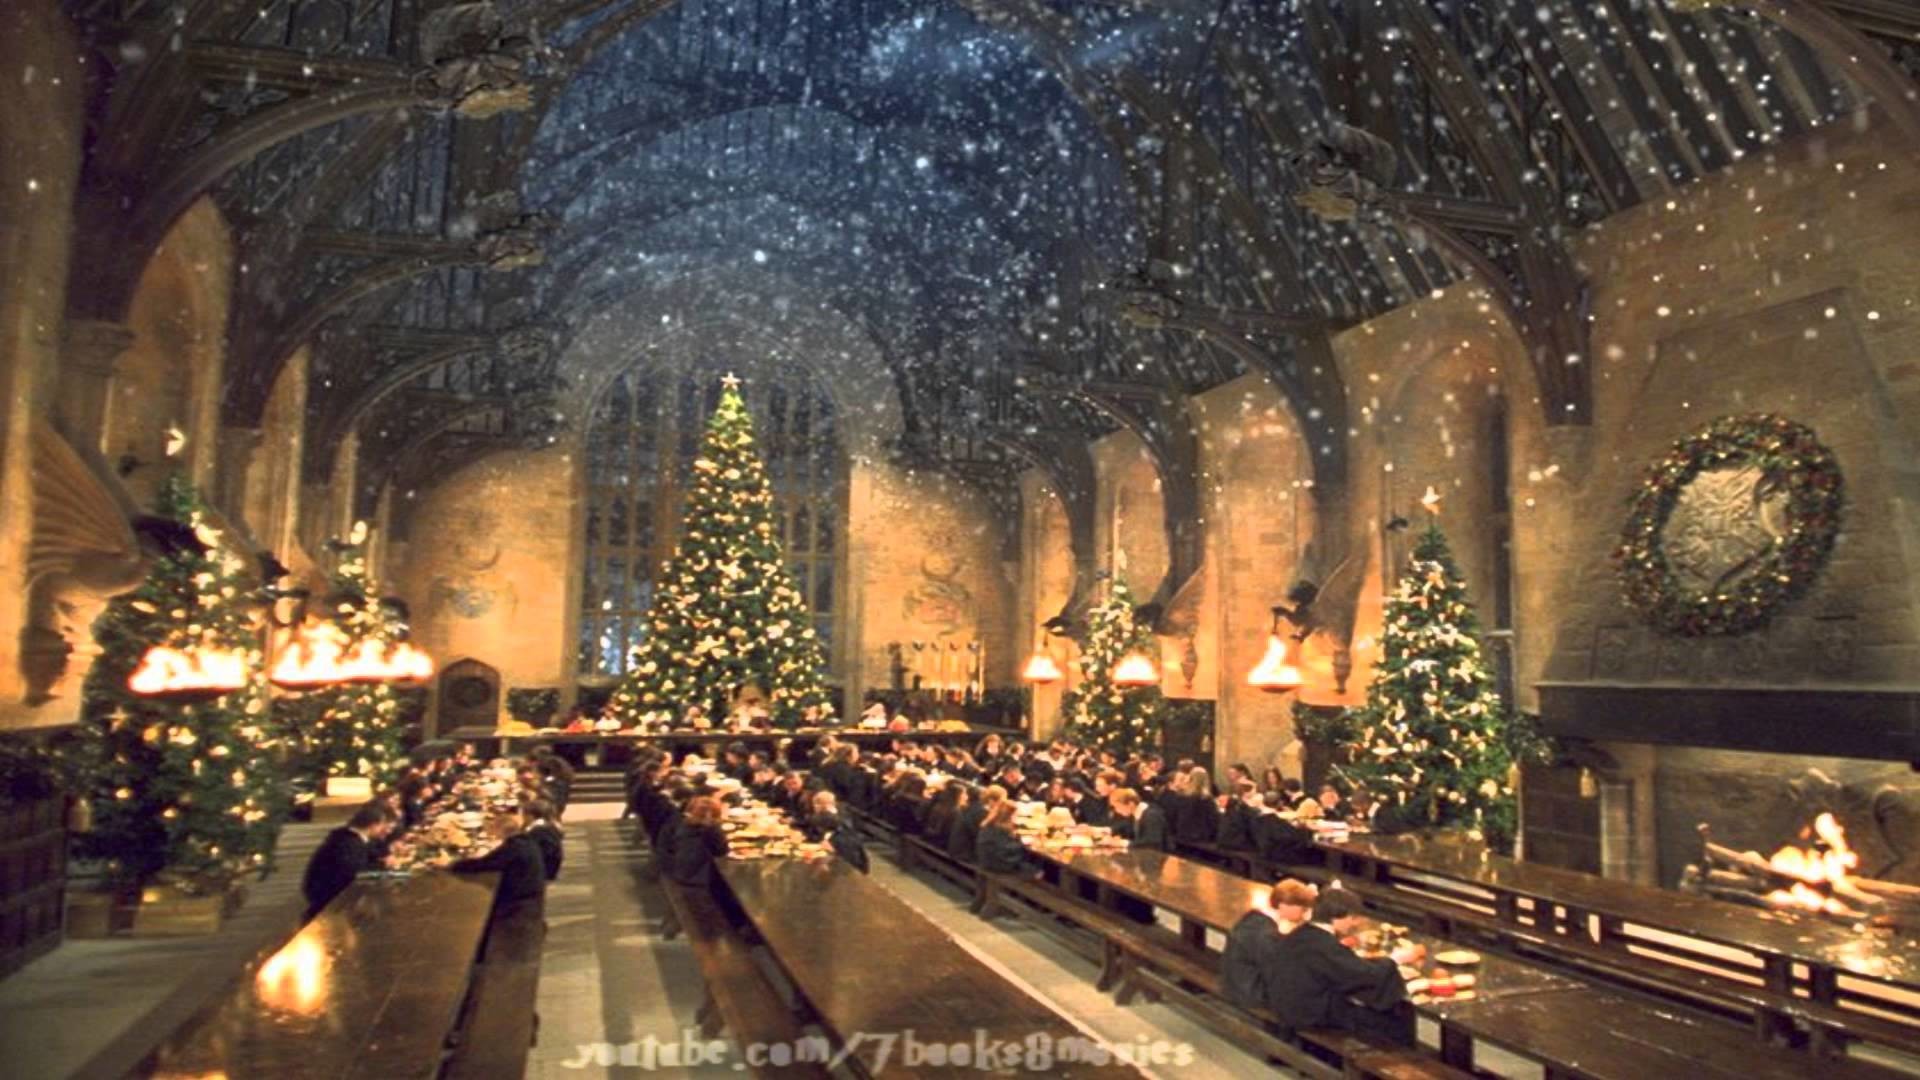 Fantastic Christmas Harry Potter Movies Widescreen Wallpapers 19201080 pixels We Try to Present Christmas